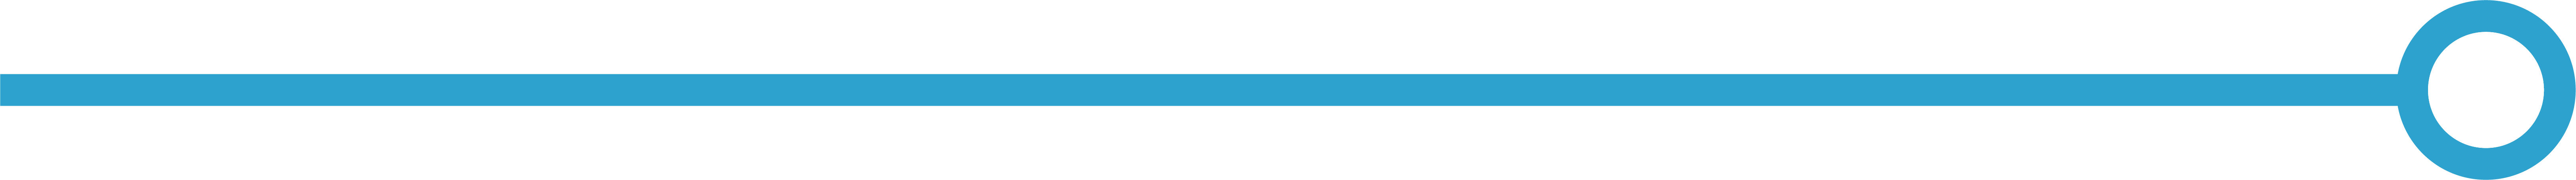 Horizontal divider bar. Blue line with circle aligned at the right end, pin shaped.